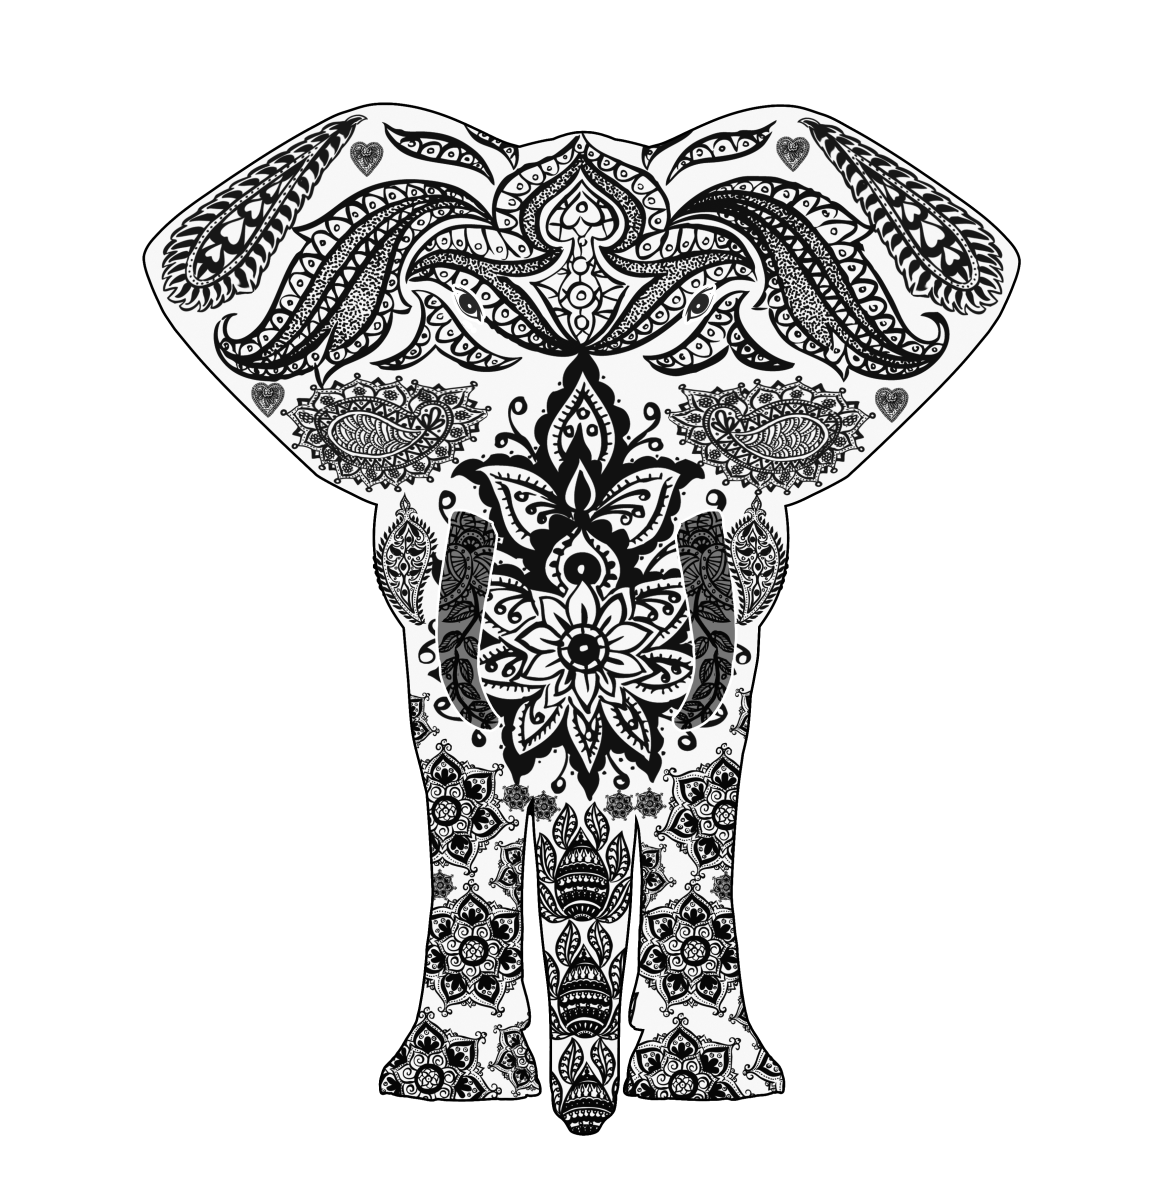 This elephant coloring page also features a floral mandala-inspired pattern.